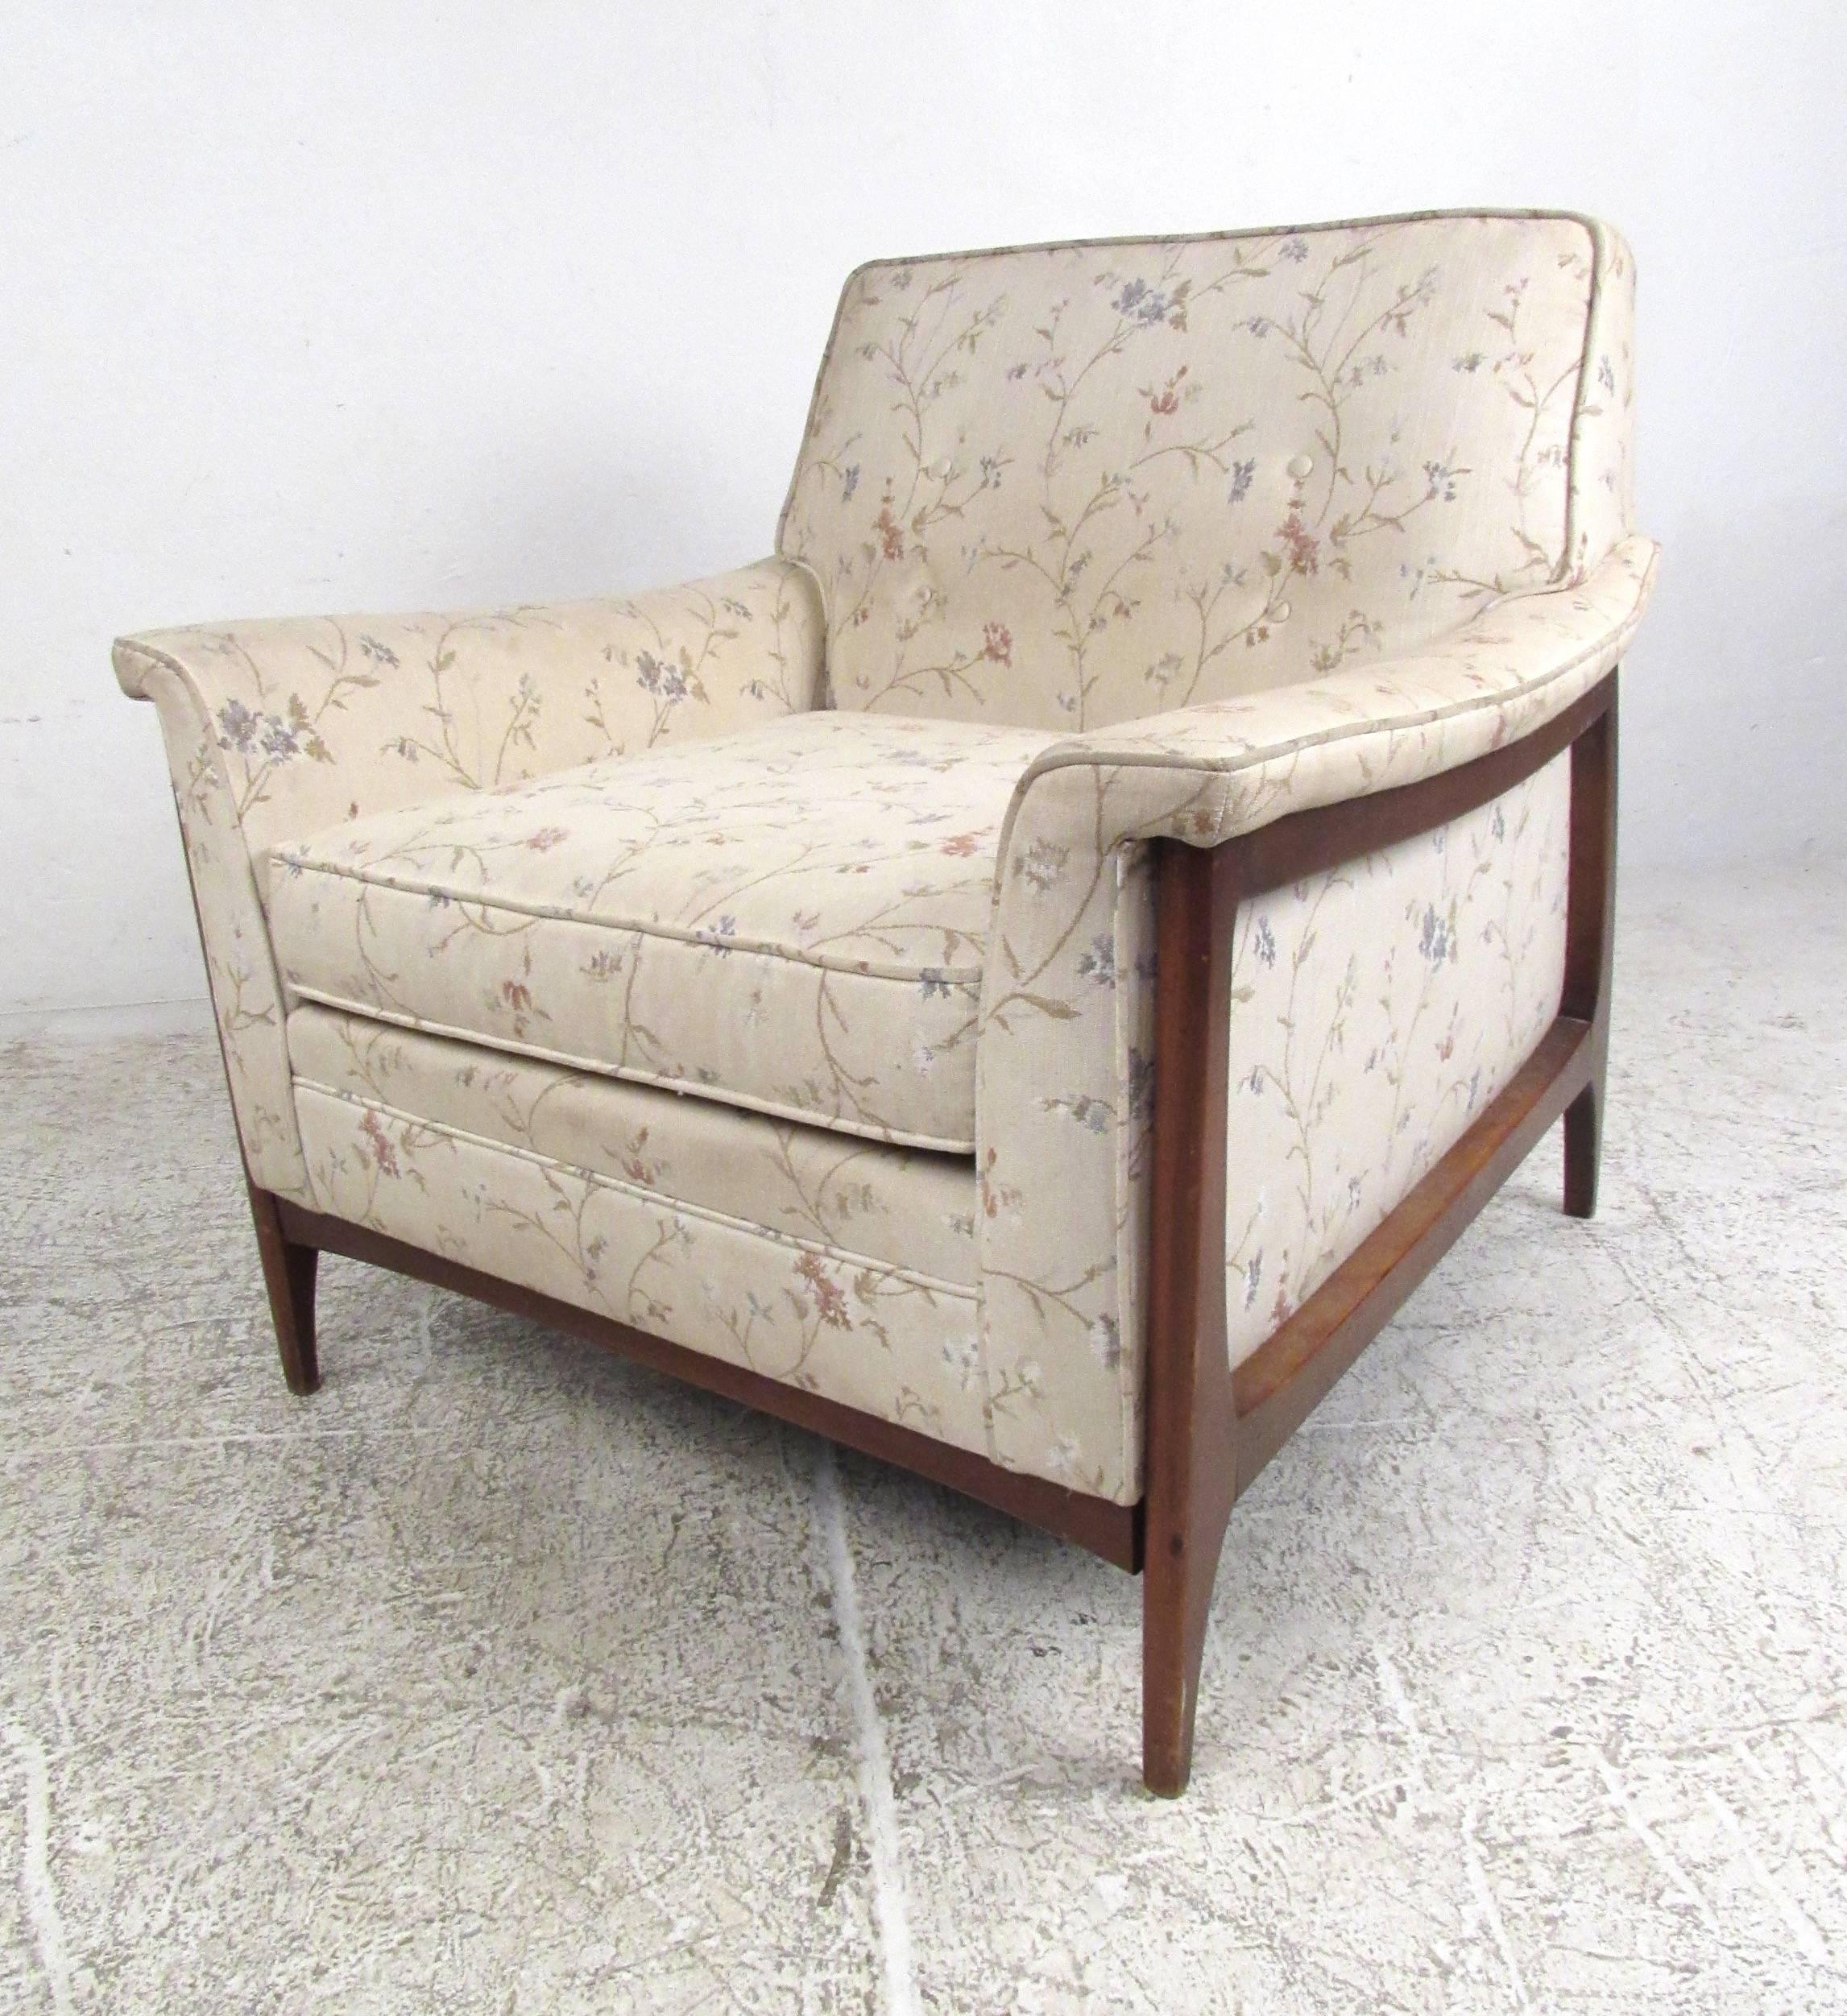 This Mid-Century Modern lounge chair features unique Adrian Pearsall style design. Vintage floral upholstery is wonderfully complimented by the natural walnut finish, while the plush upholstery makes this a comfortable addition to any setting.